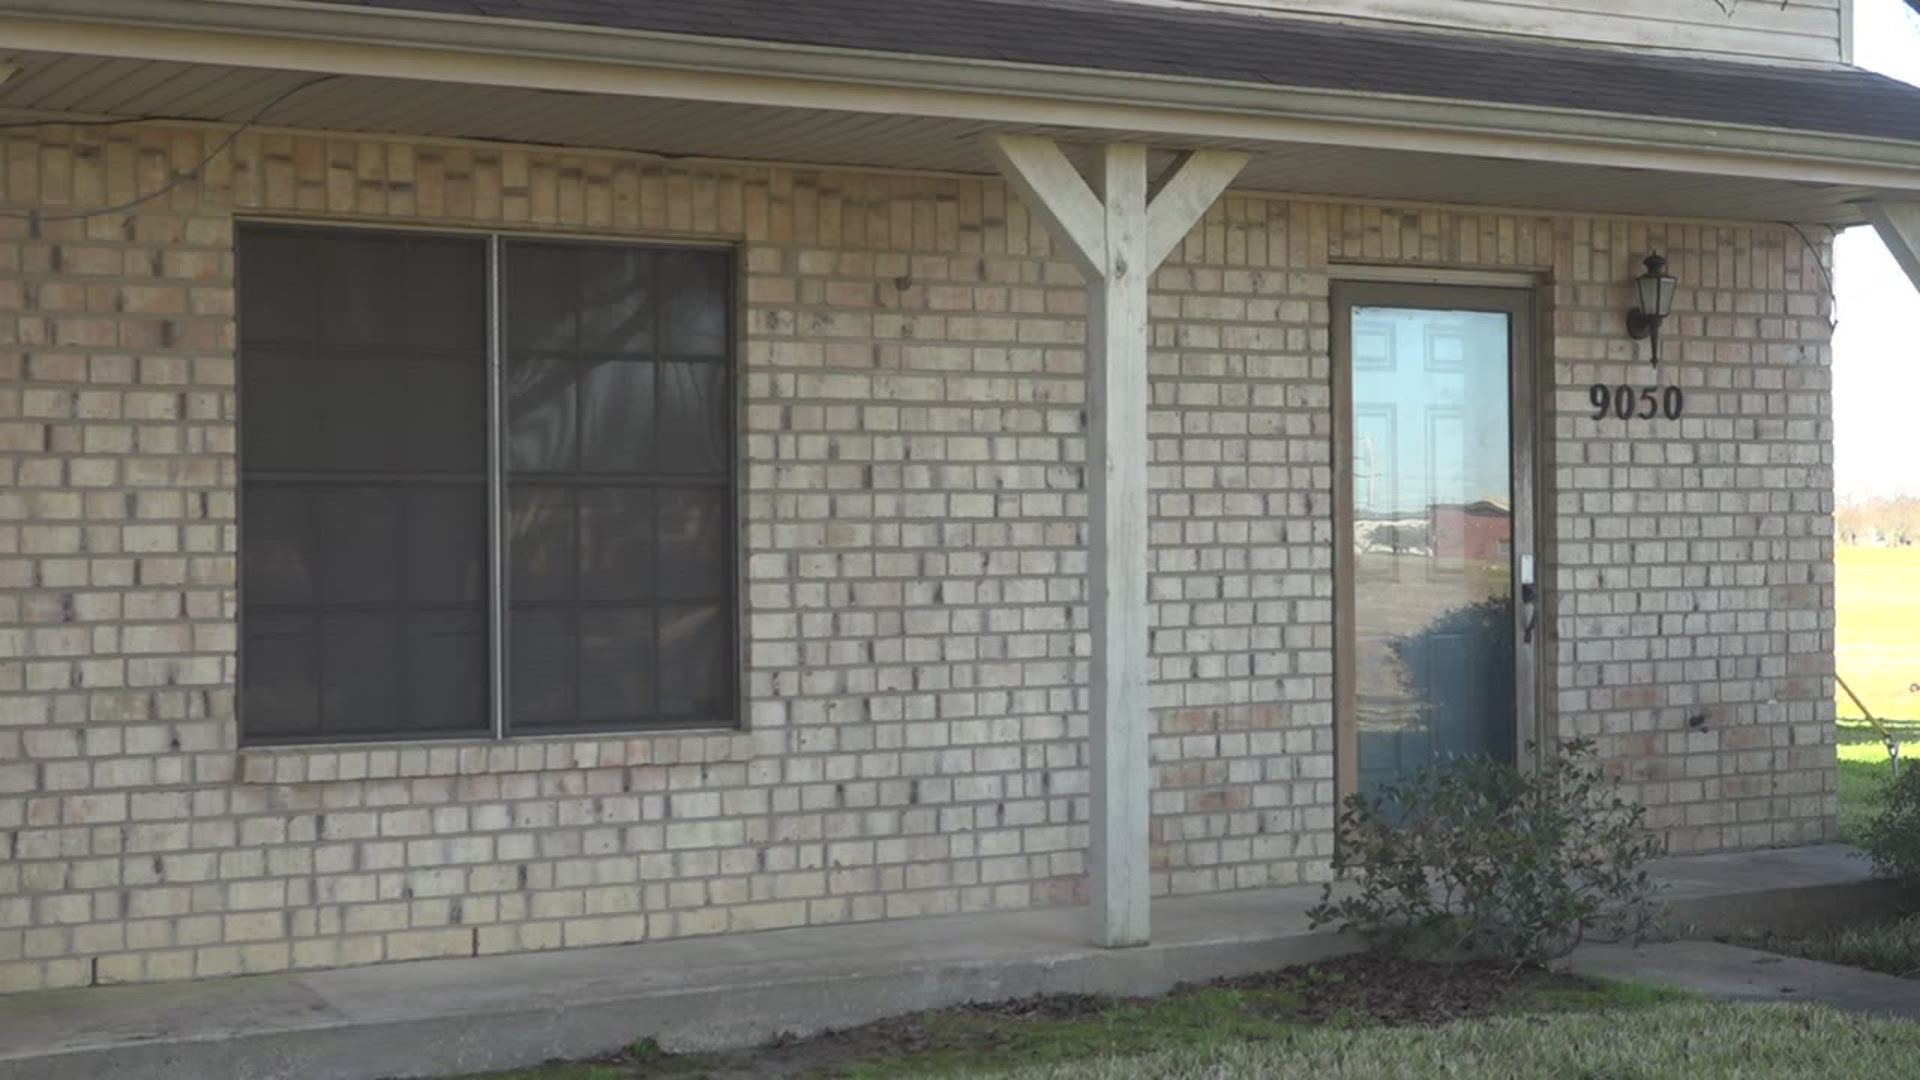 If you're looking to buy a house in Beaumont, you may want to register for Beaumont Housing Authority's live house auction in February.